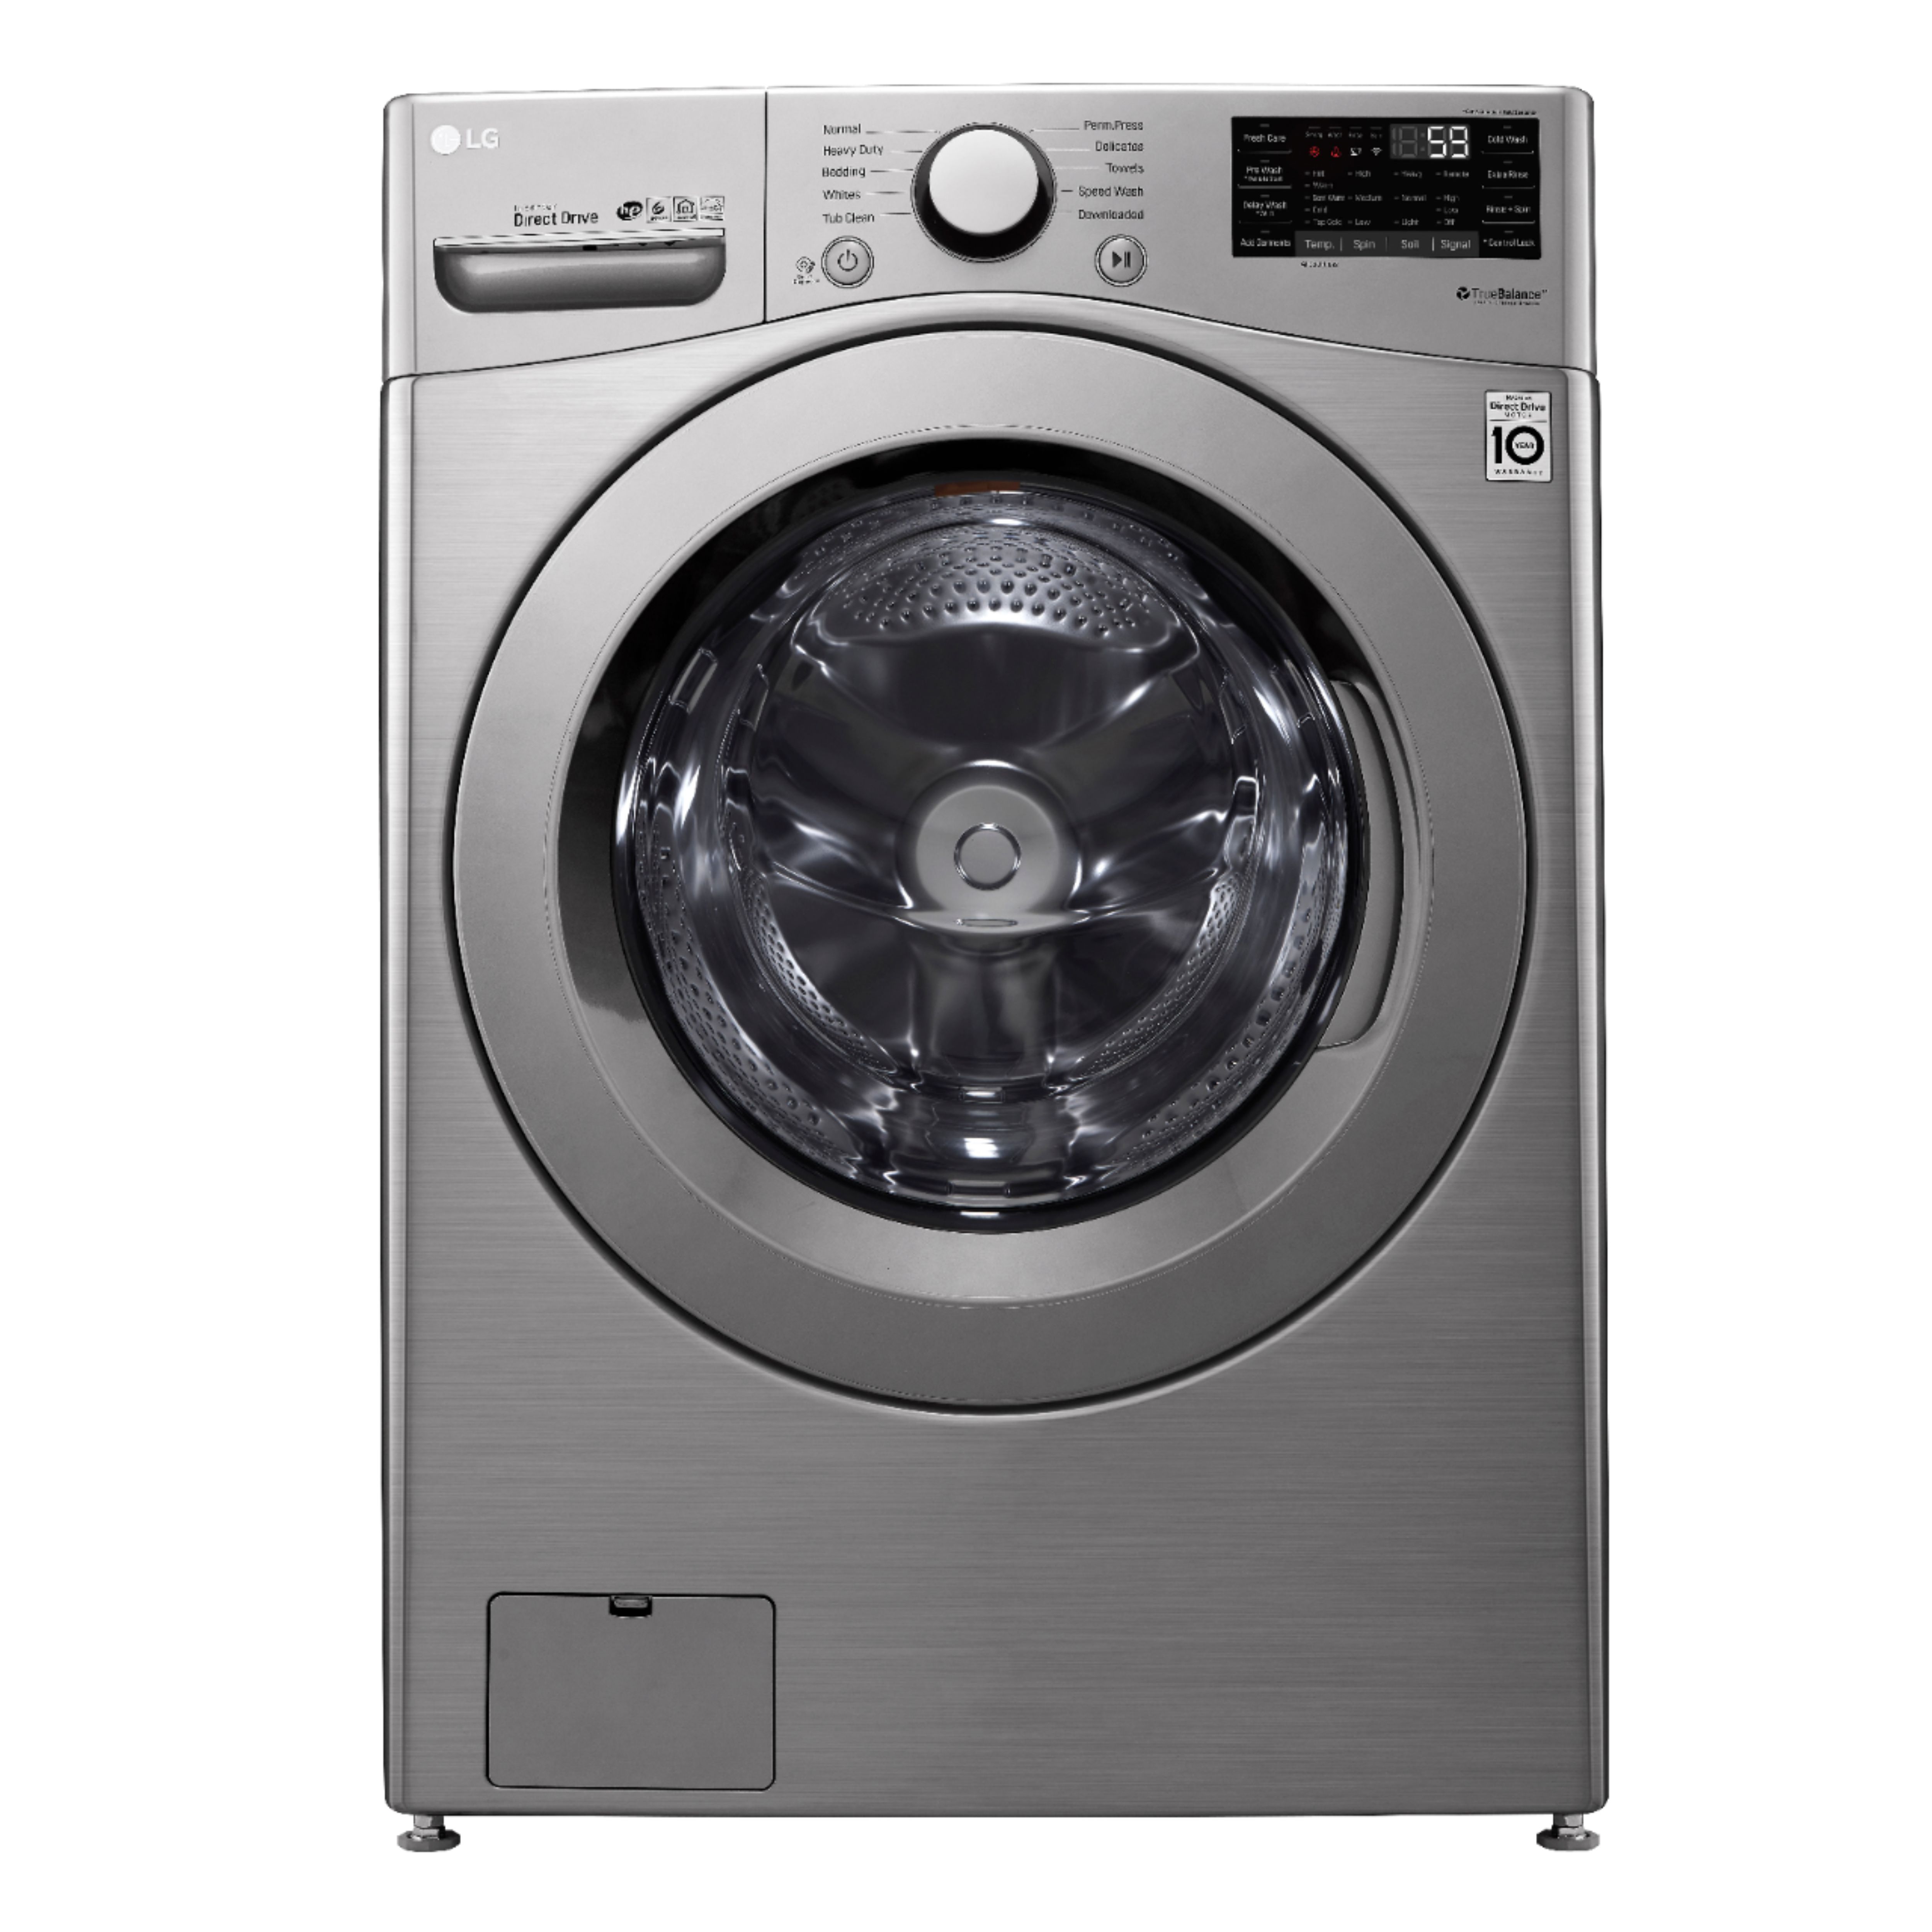 Best Buy Lg 4 5 Cu Ft 10 Cycle High Efficiency Front Loading Washer With 6motion Technology Graphite Steel Wm3460cv